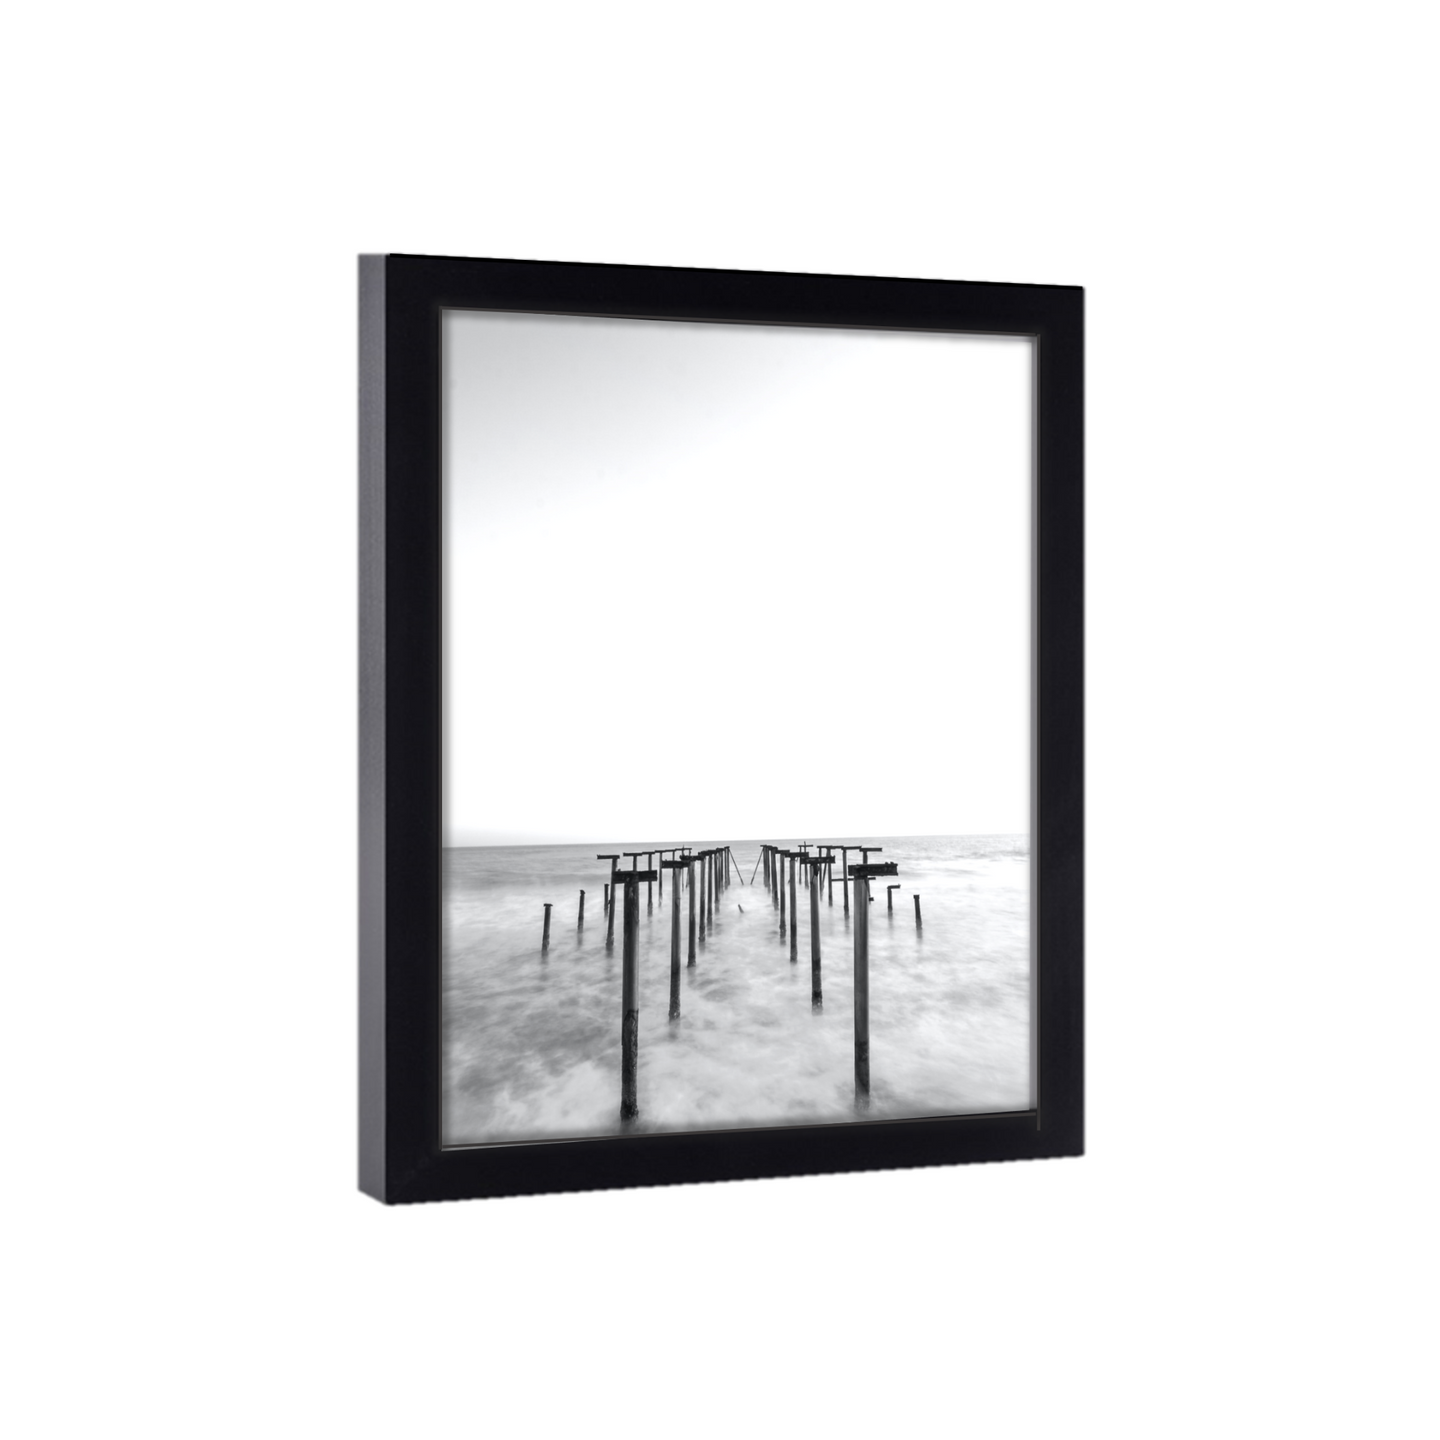 Gallery Wall 19x32 Picture Frame Black Wood 19x32  Poster Size